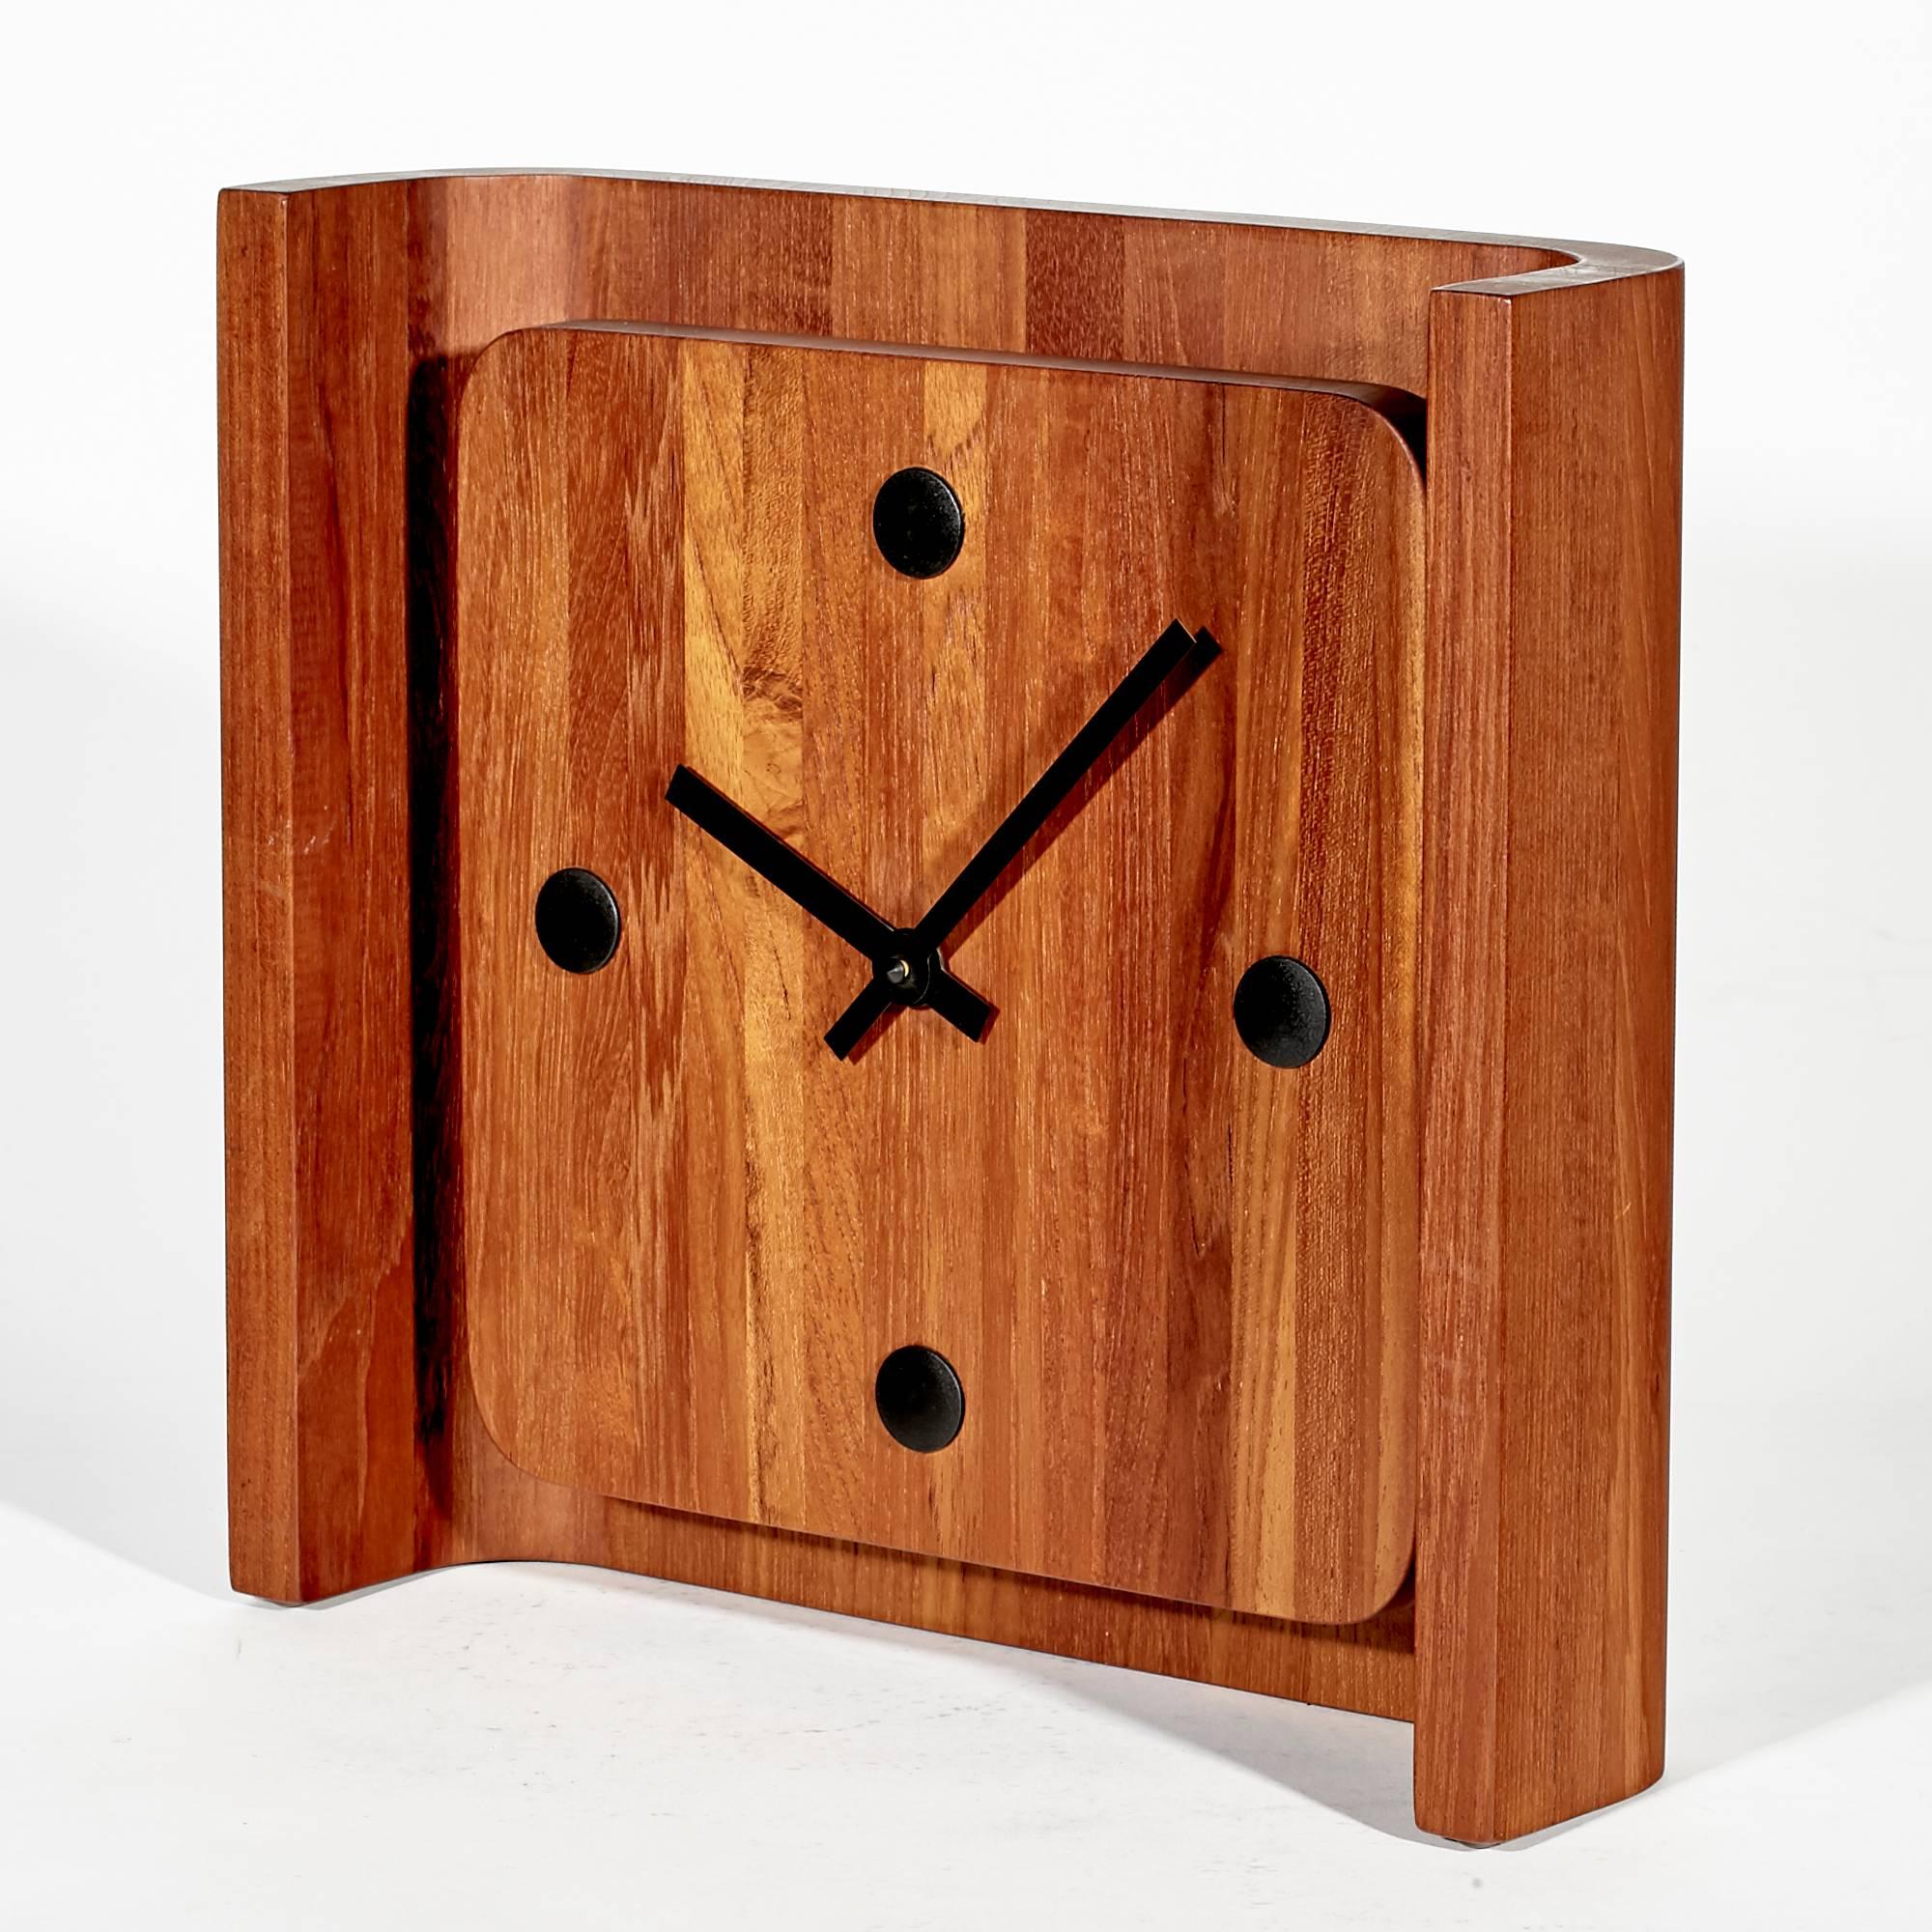 Vintage 1970s Danish teak clock with a curved back. Clock can sit or be hung. Uses a AA battery, has been tested and is in working condition. Marked Denmark on the back.